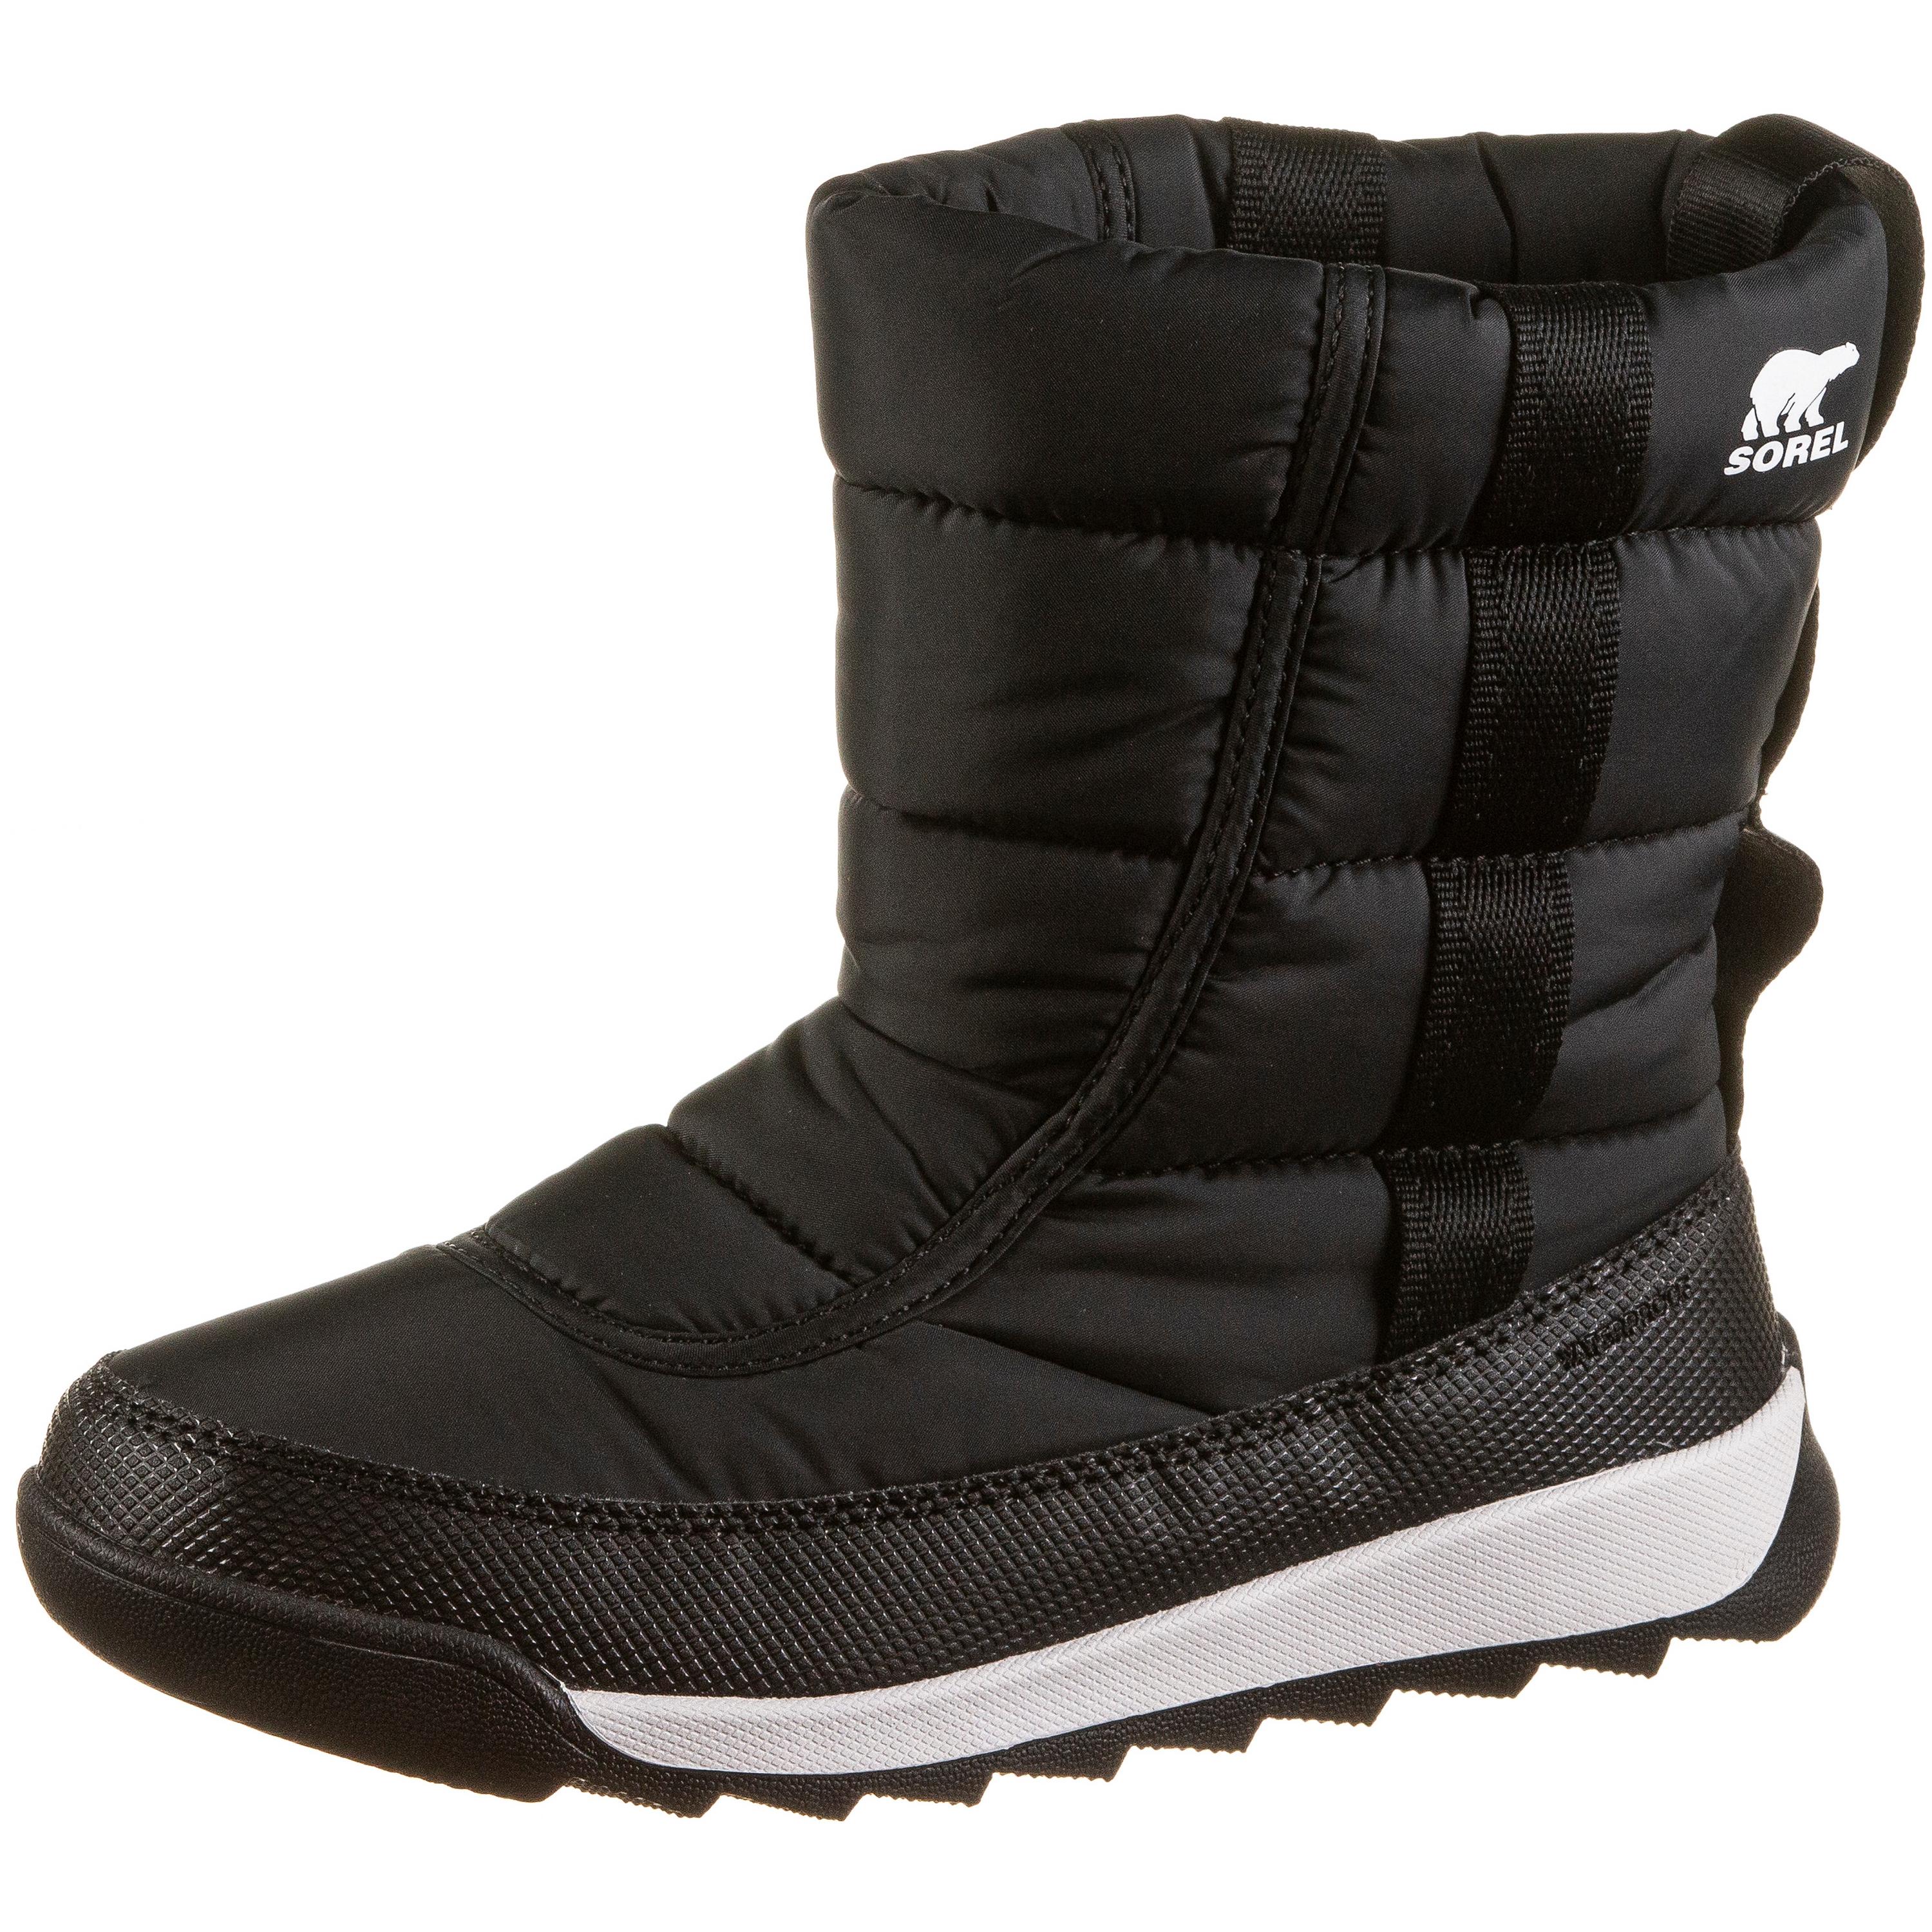 Sorel YOUTH WHITNEY II PUFFY MID Stiefel Kinder